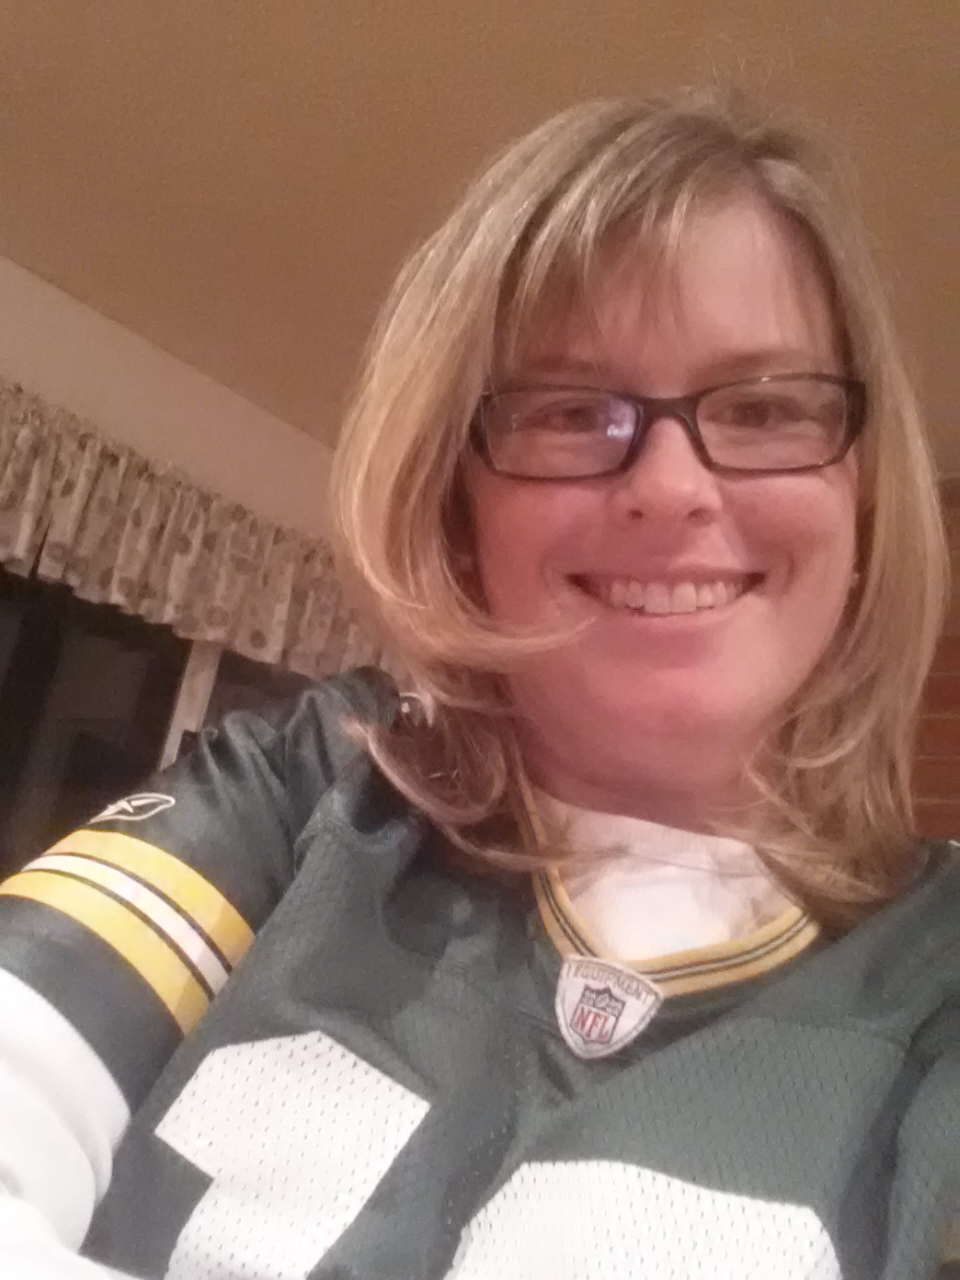 A white woman with brown, rectangular glasses, blonde hair, and a Green Bay Packers jersey